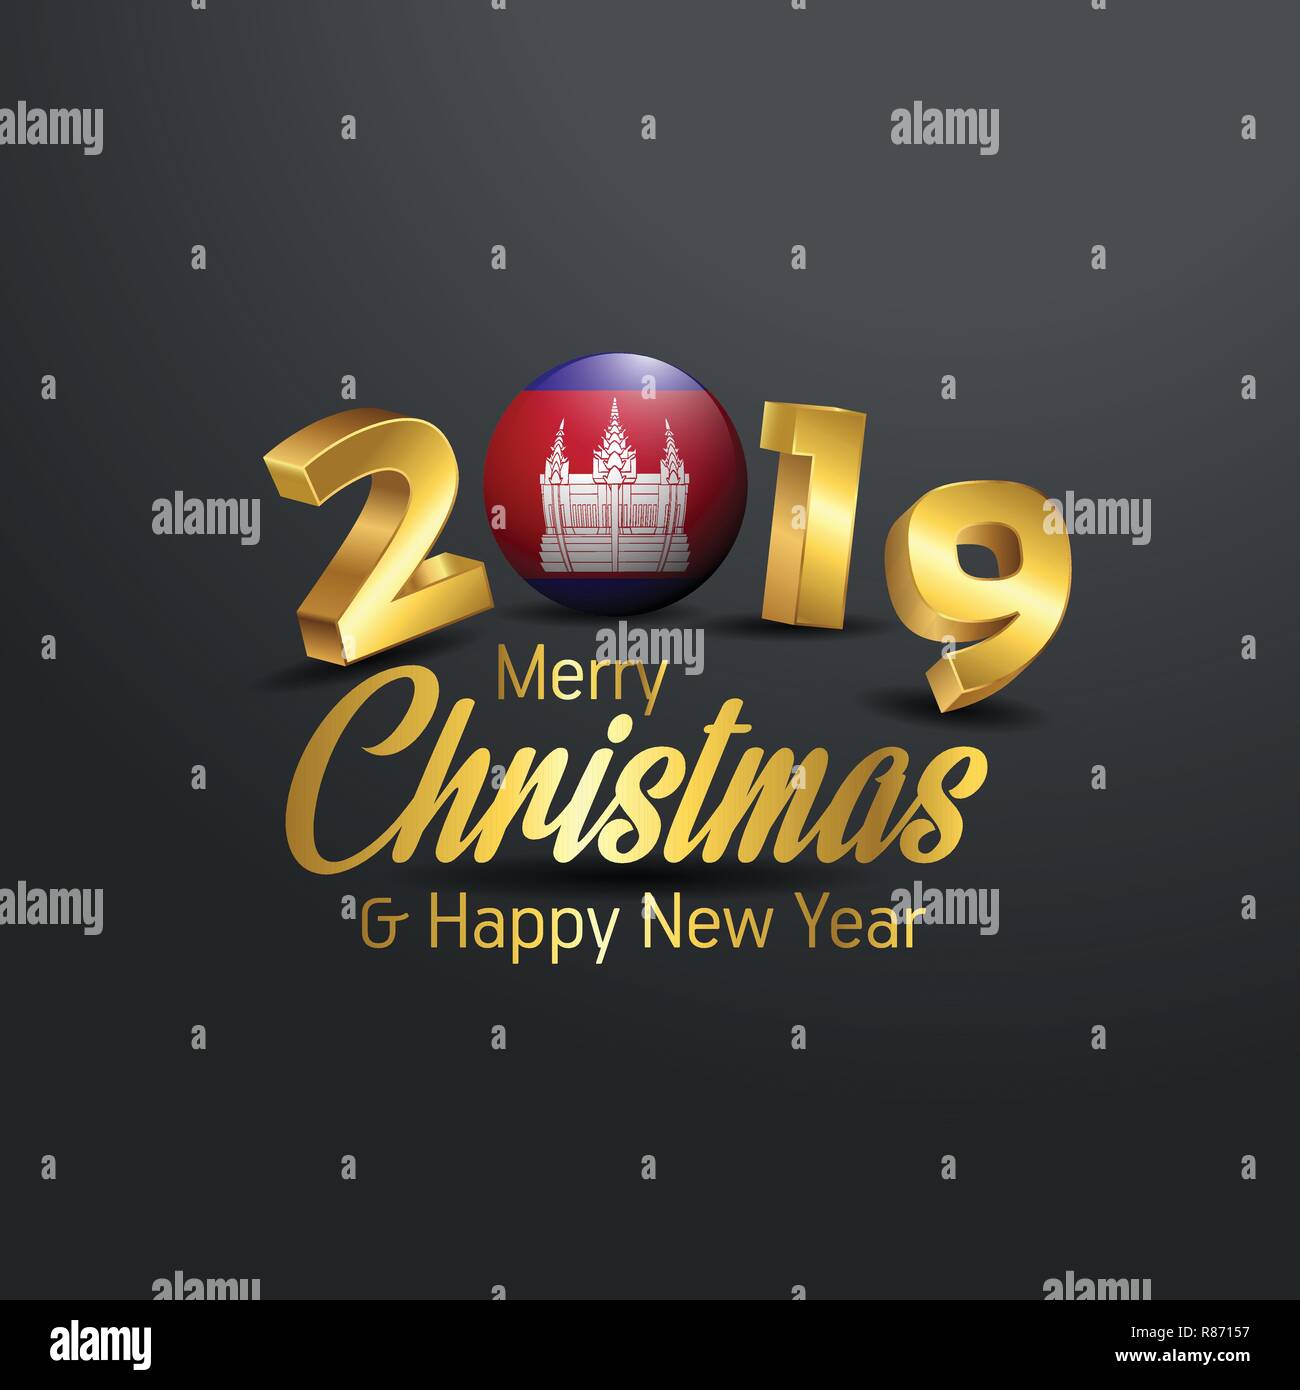 Cambodia Flag 2019 Merry Christmas Typography. New Year Abstract Celebration background Stock Vector